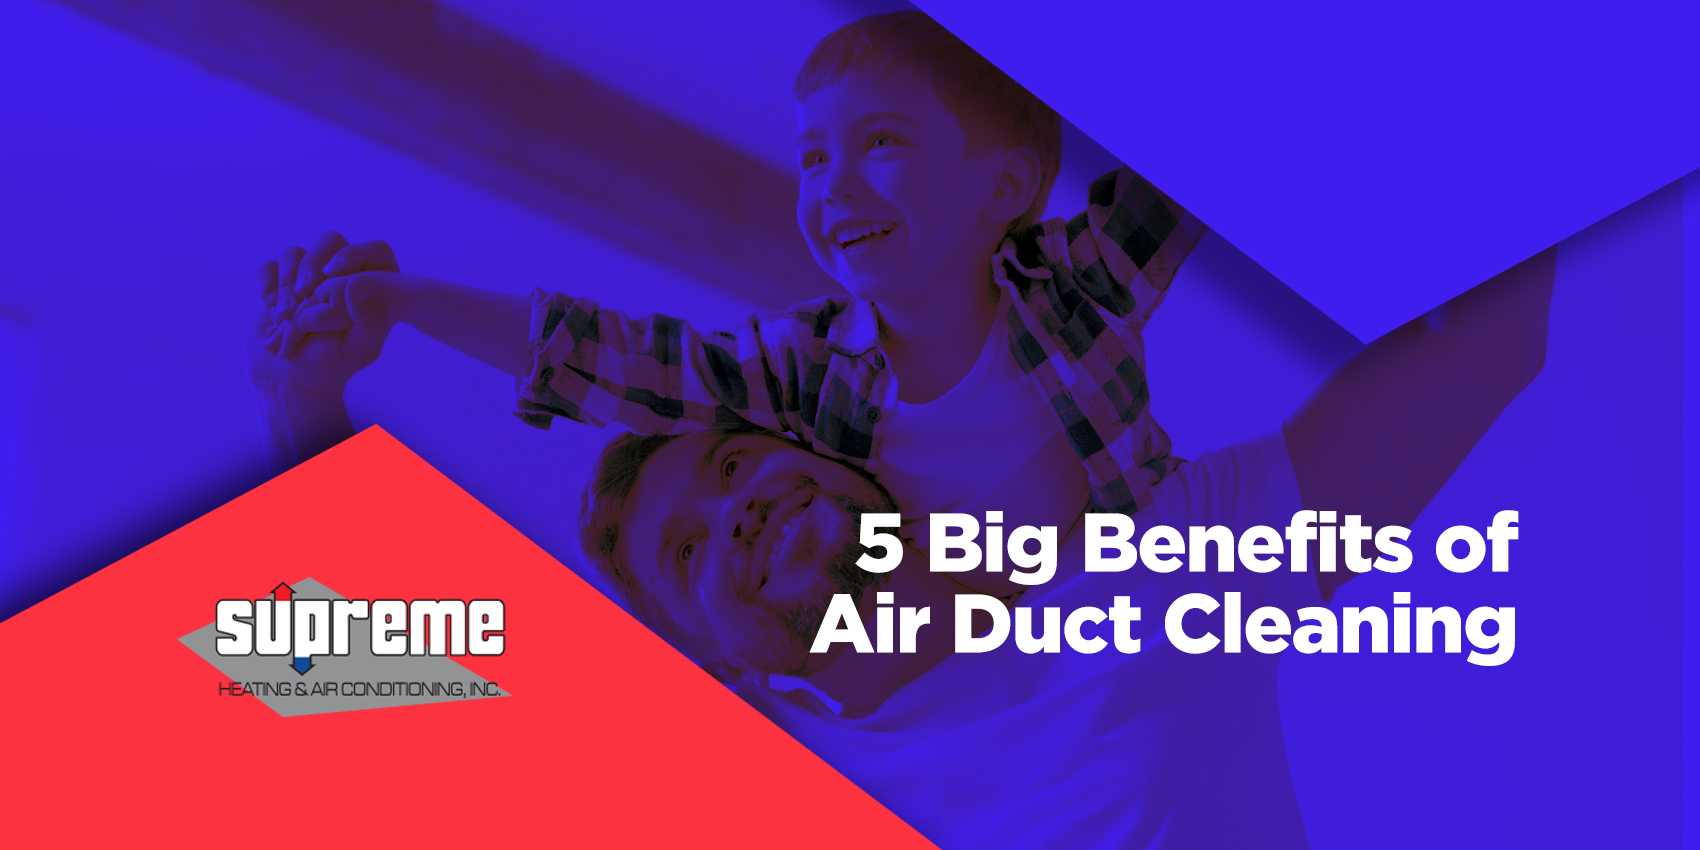 5 Big Benefits of Air Duct Cleaning